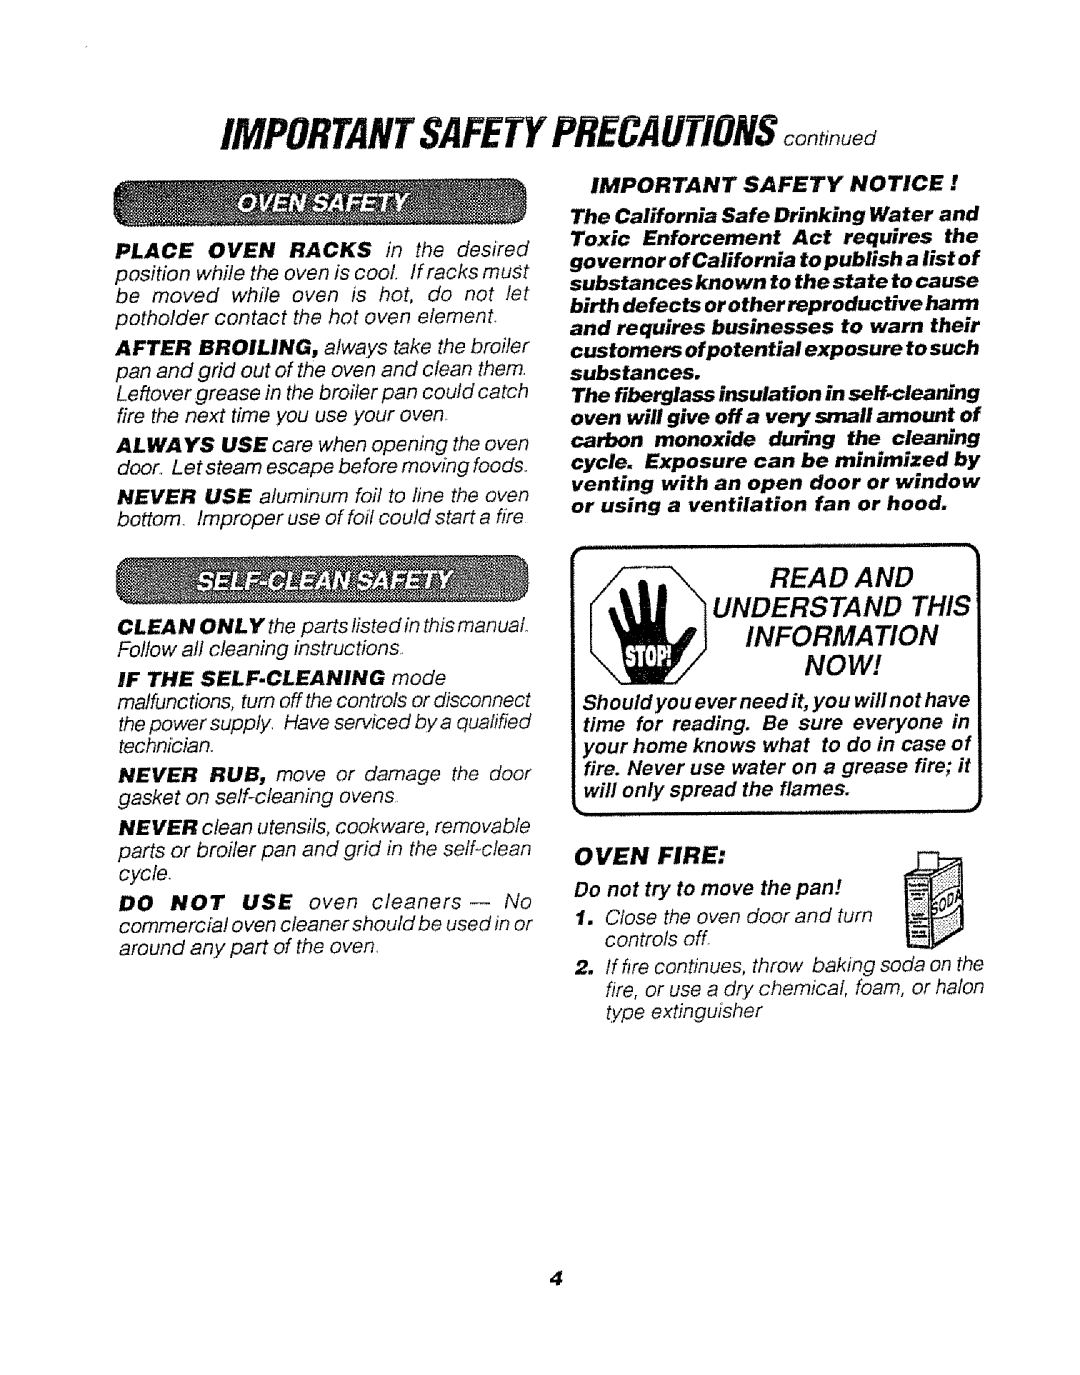 Sears 911.47469, 911.47466 manual IMPORTANTSAFETYPFtECAUTIONSoontinued, Read And Understand This Information Now, Oven Fire 